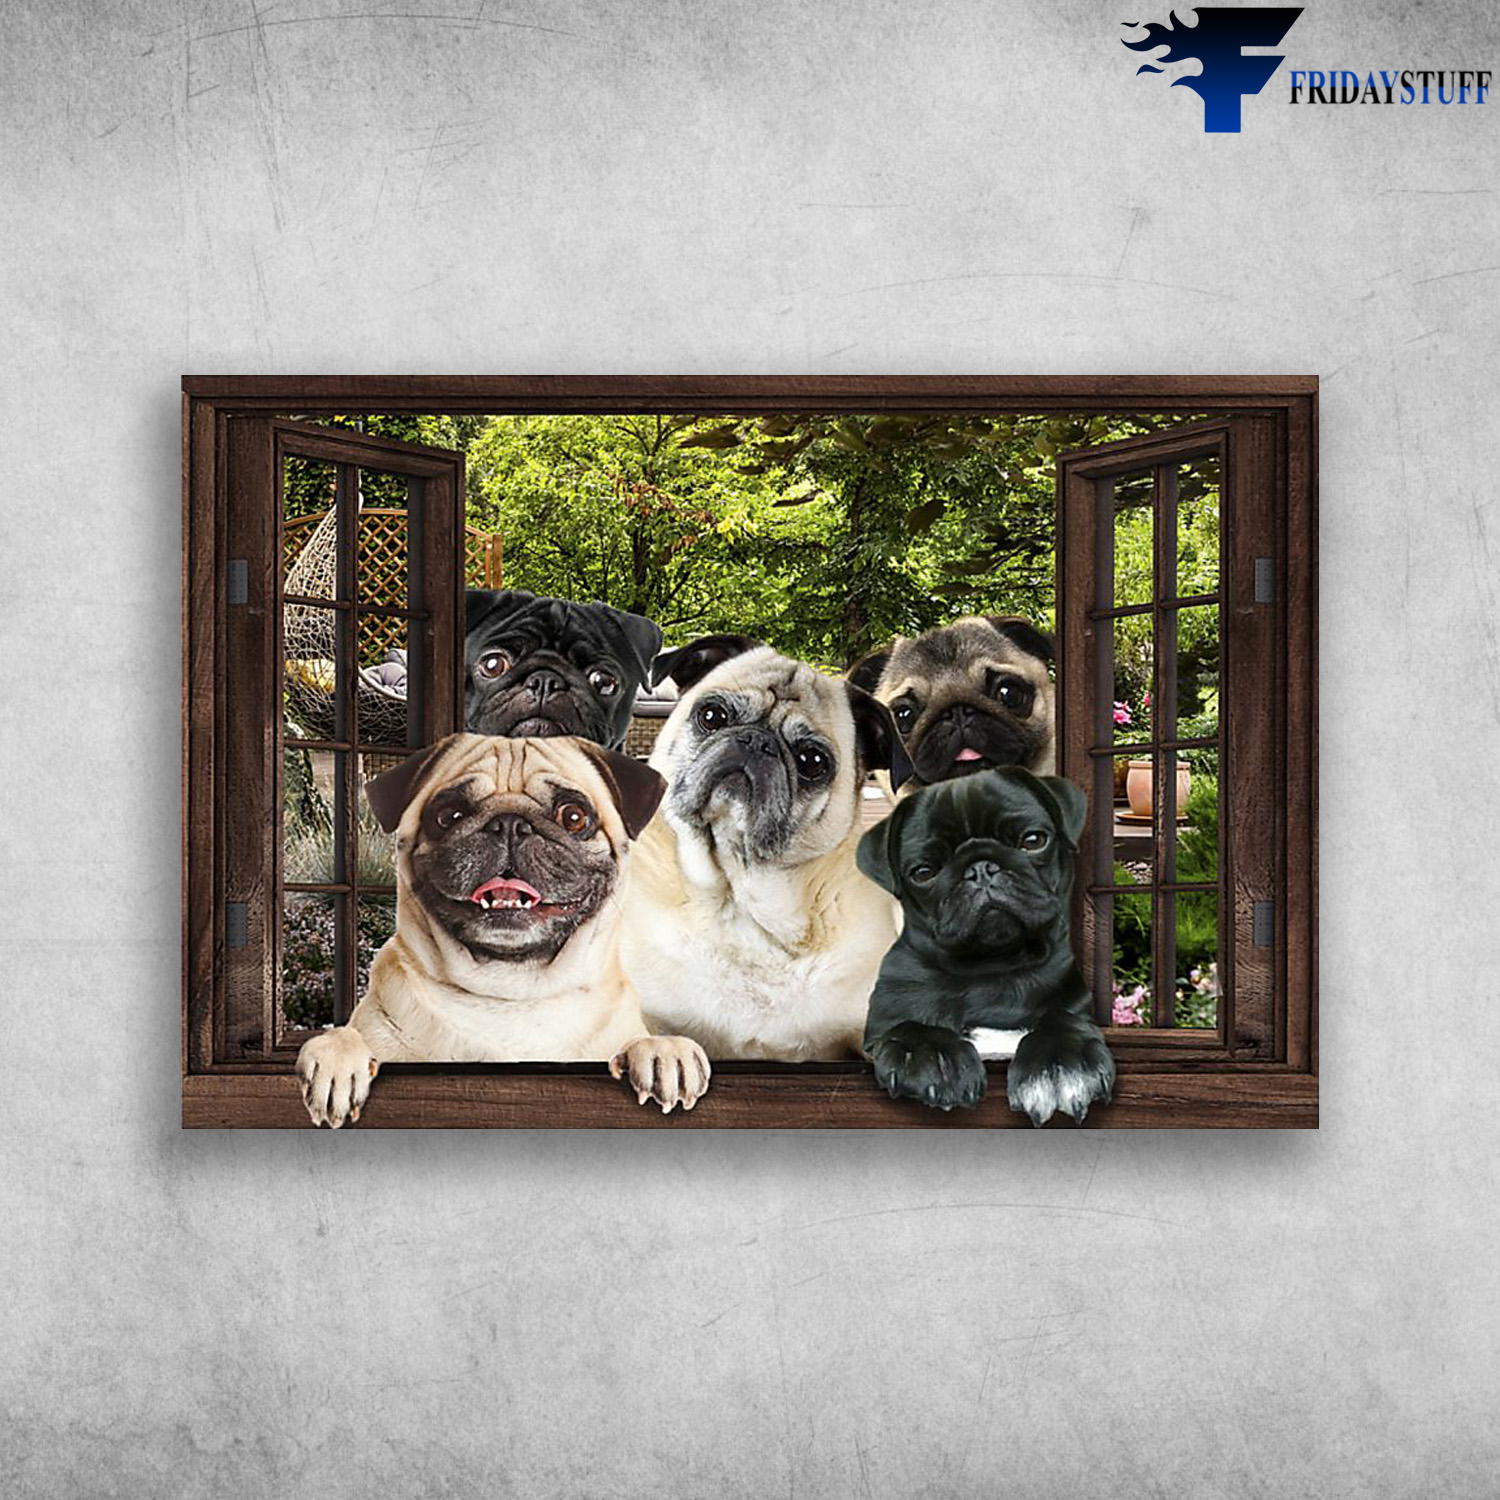 The Pugs Outside The Window